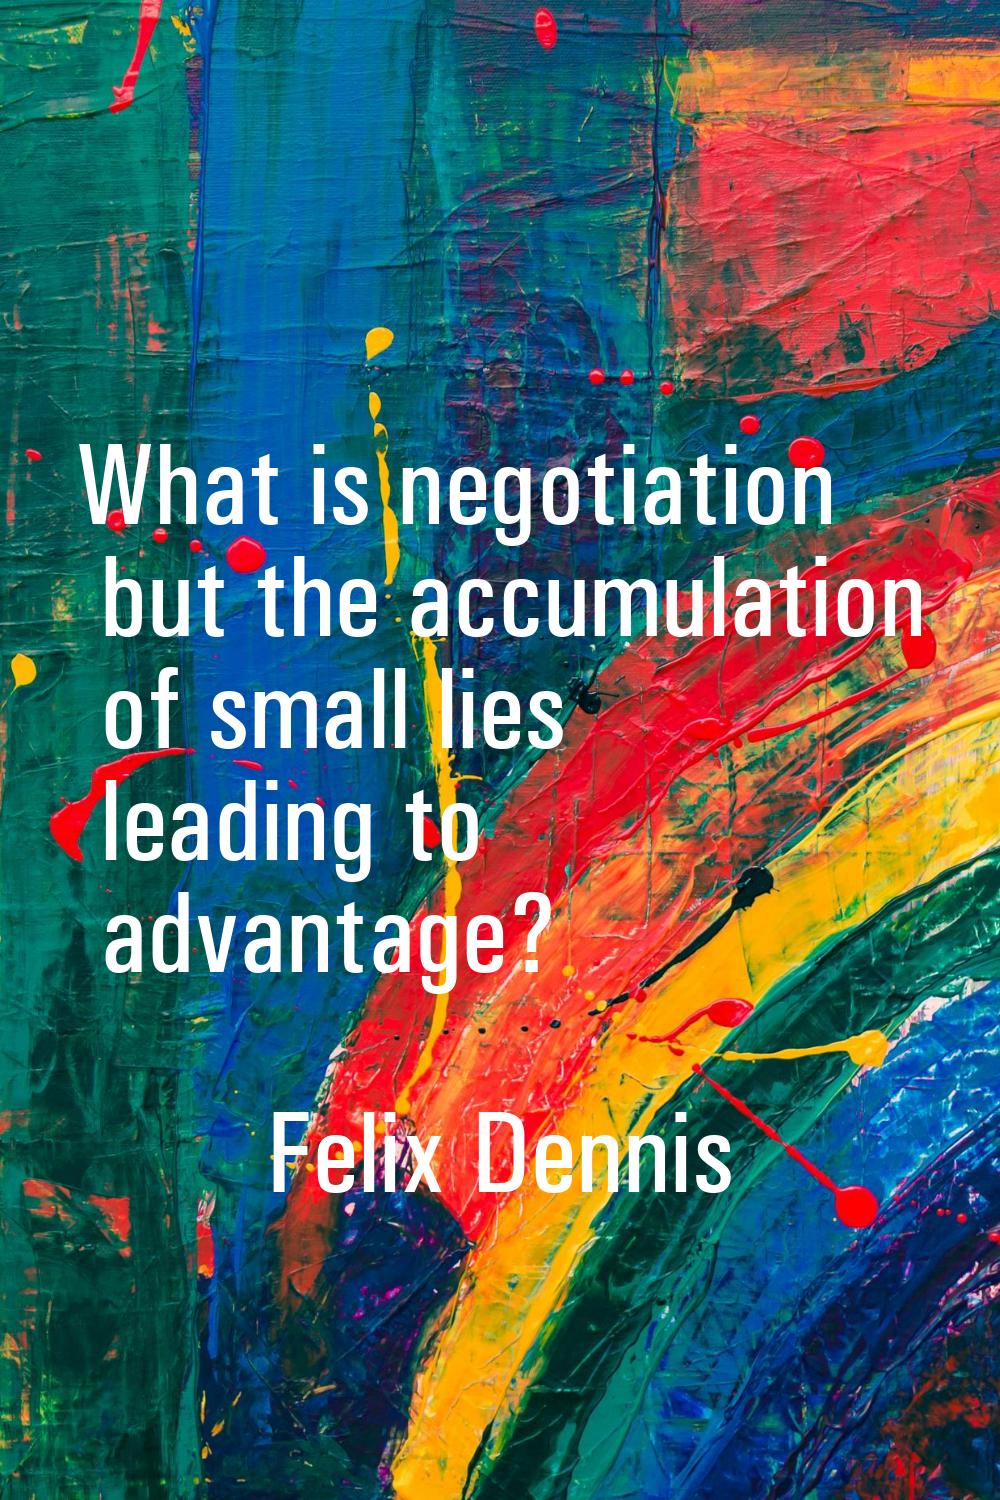 What is negotiation but the accumulation of small lies leading to advantage?